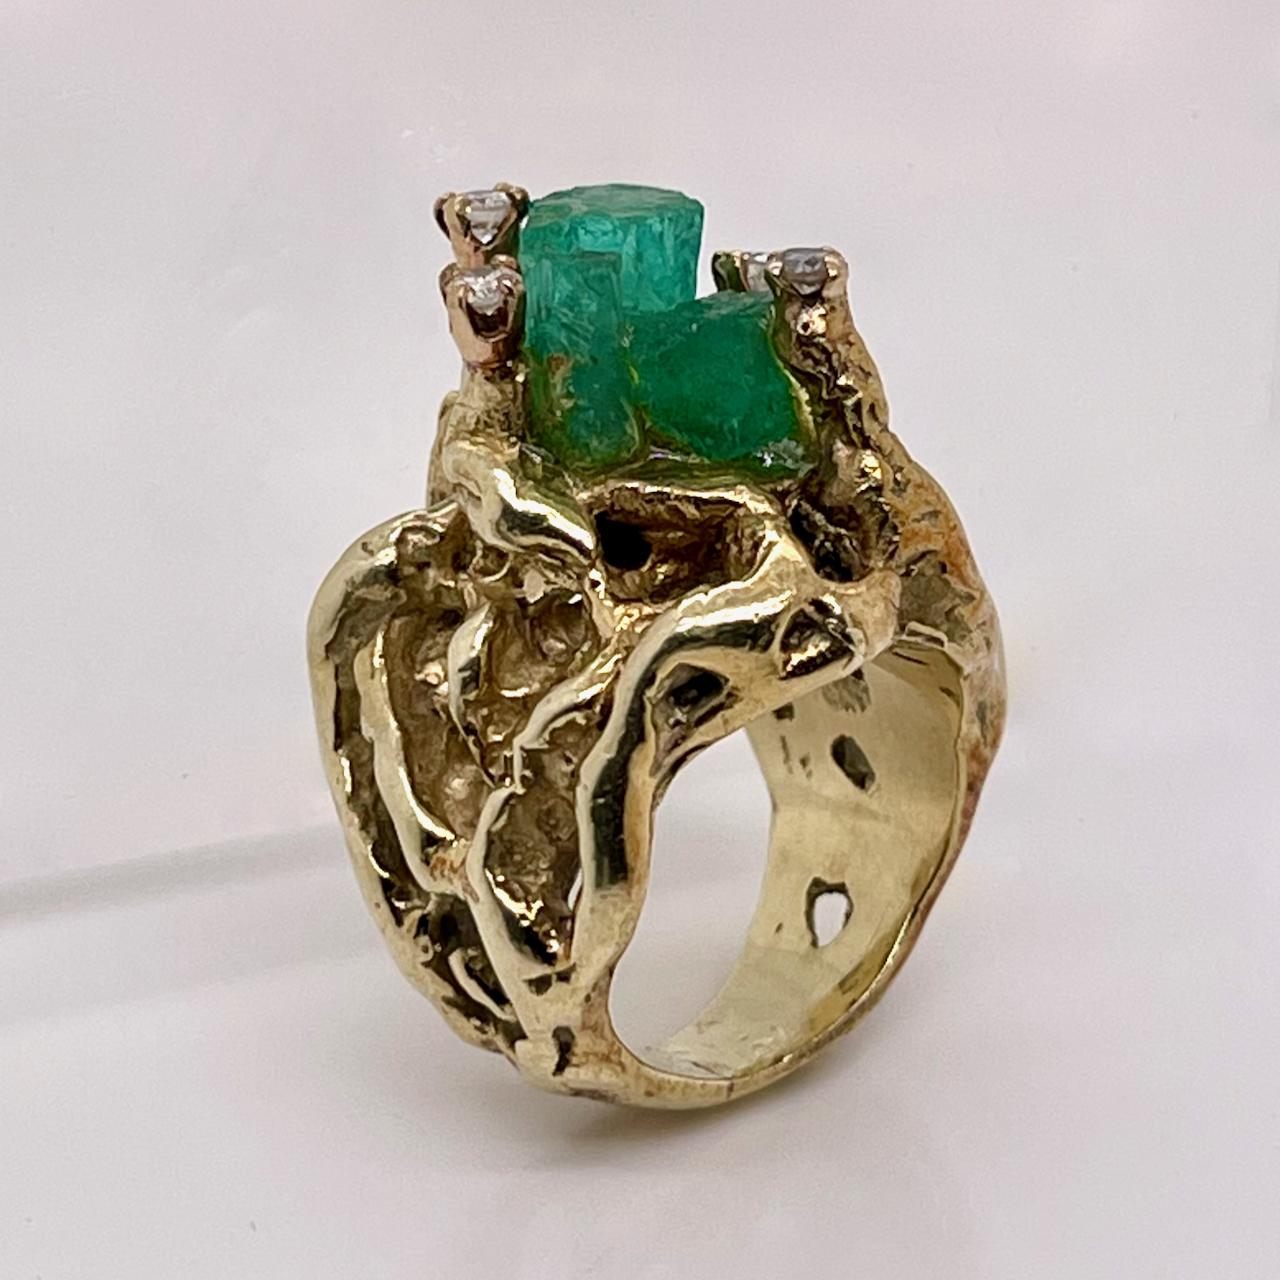 A very fine brutalist 14k gold, Chatham emerald and diamond cocktail ring.

With large raw Chatham emeralds that are center set and flanked by round brilliant prong set diamonds. 

The base and shank are cast in an organic brutalist manner.

Simply